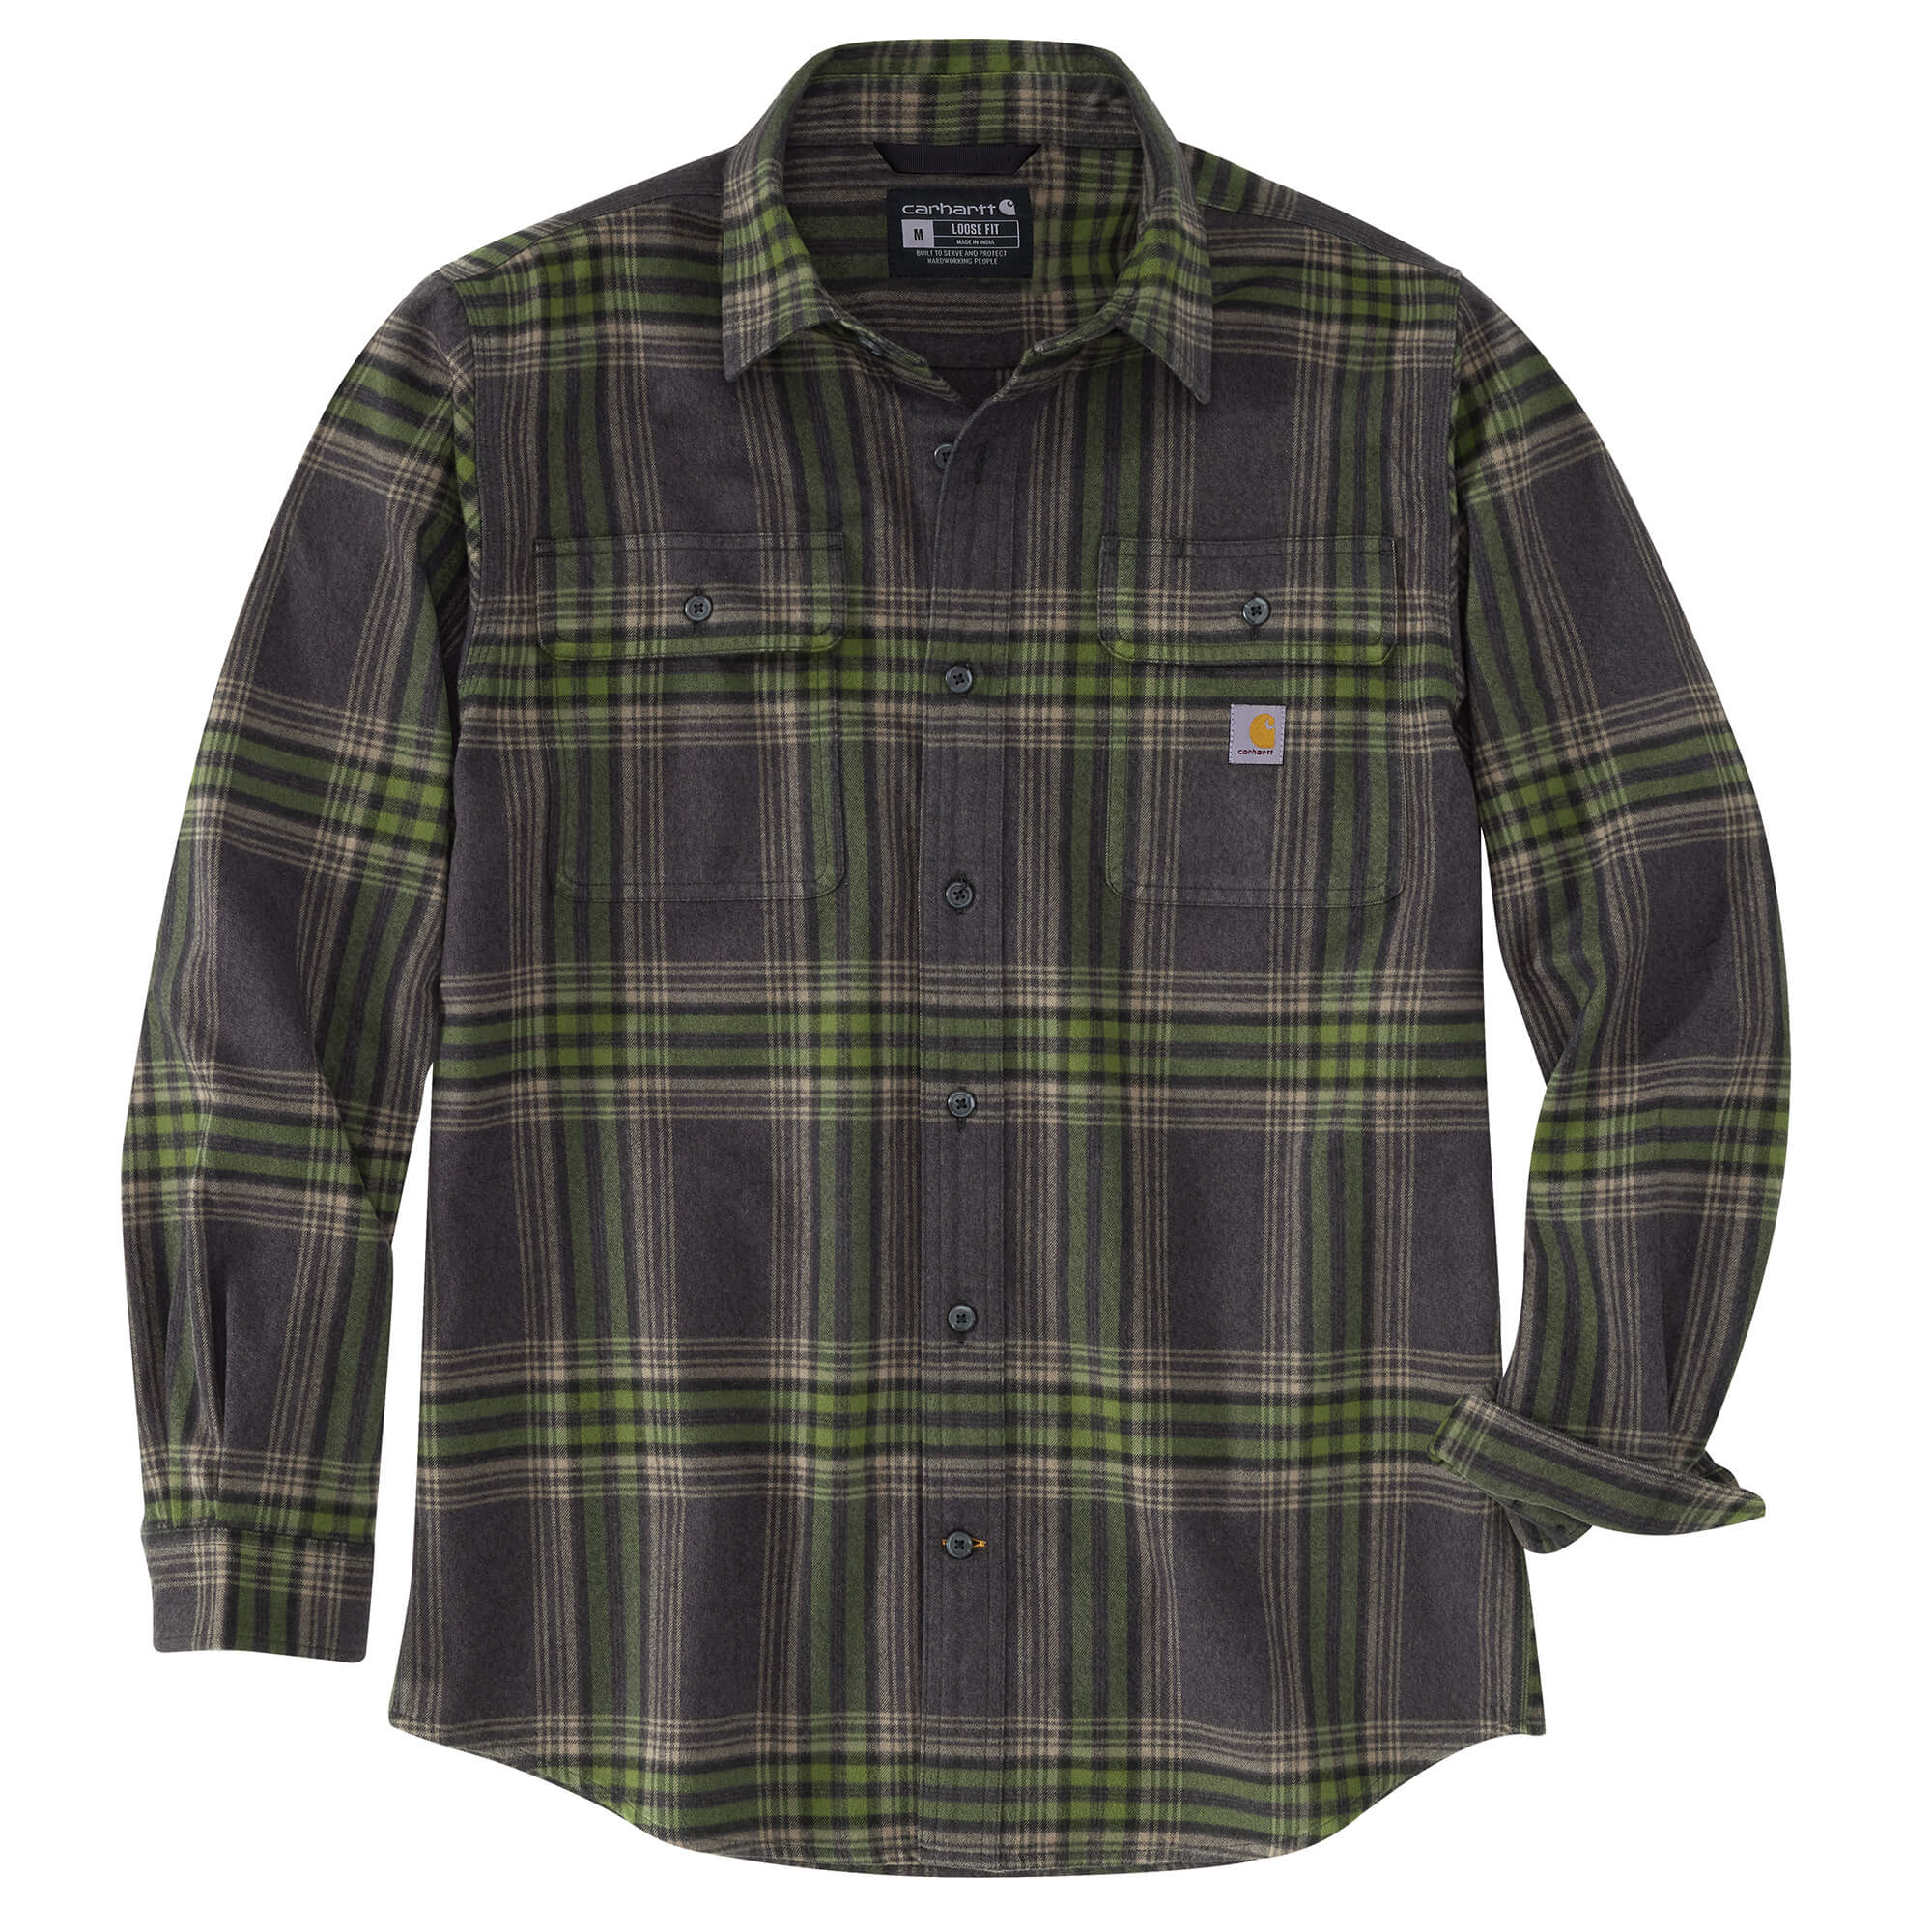 105947 - Loose Fit Heavyweight Flannel Long-Sleeve Plaid Shirt